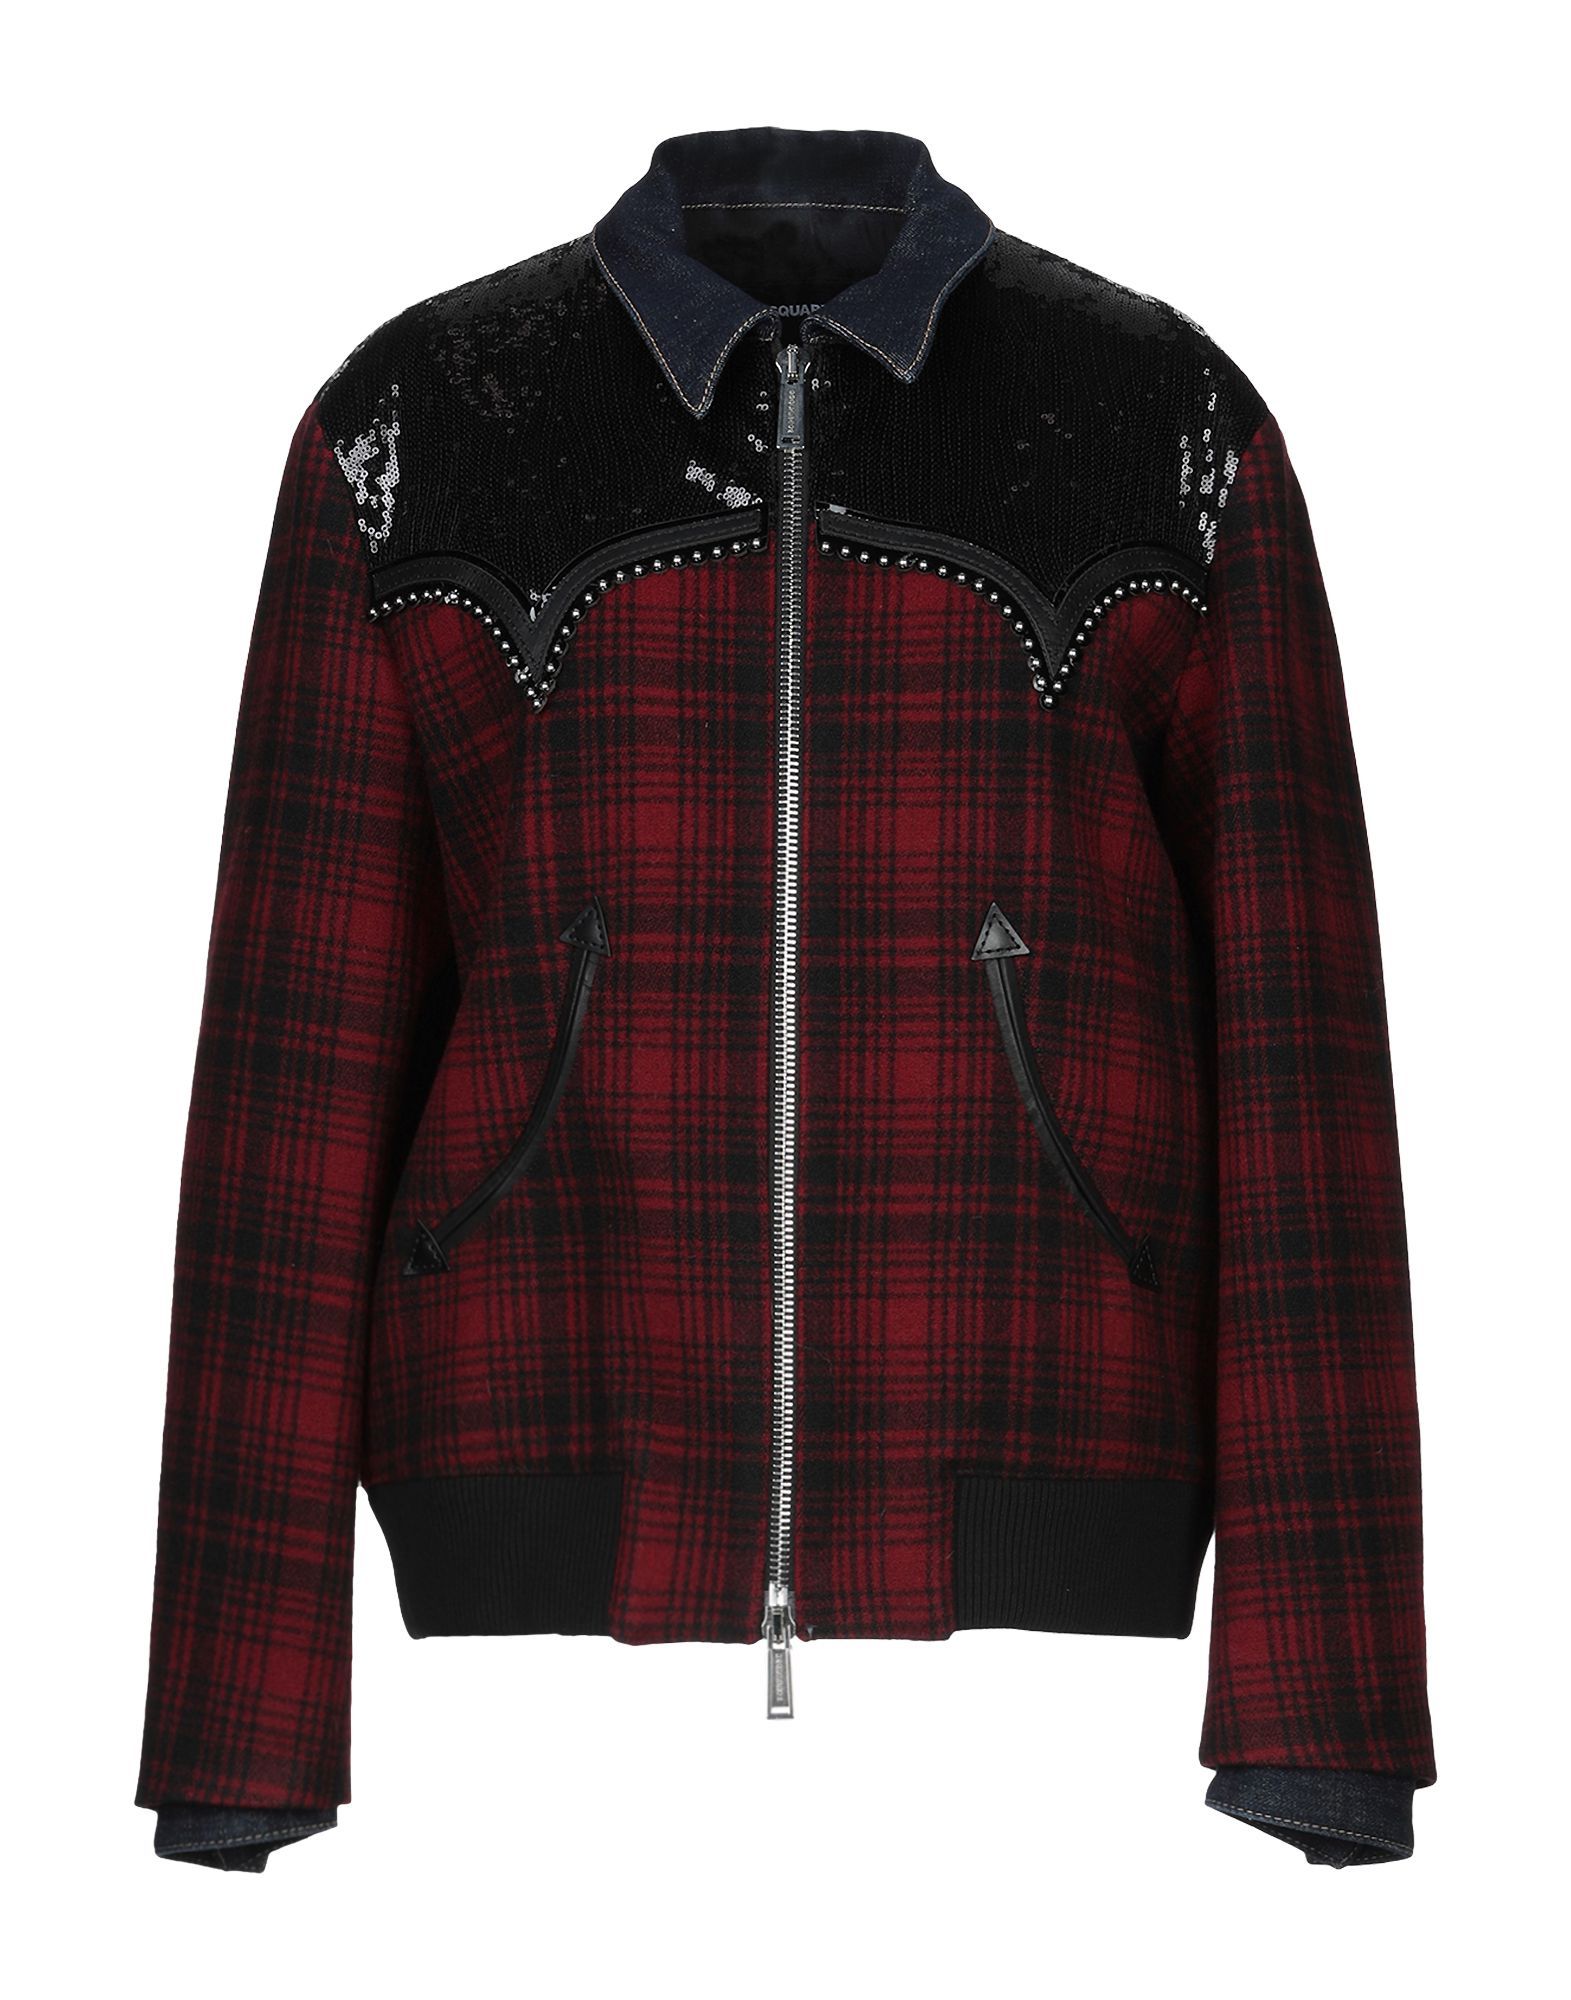 denim, flannel, studs, sequins, tartan plaid, single-breasted , zip, classic neckline, multipockets, long sleeves, fully lined, contains non-textile parts of animal origin, bomber jacket